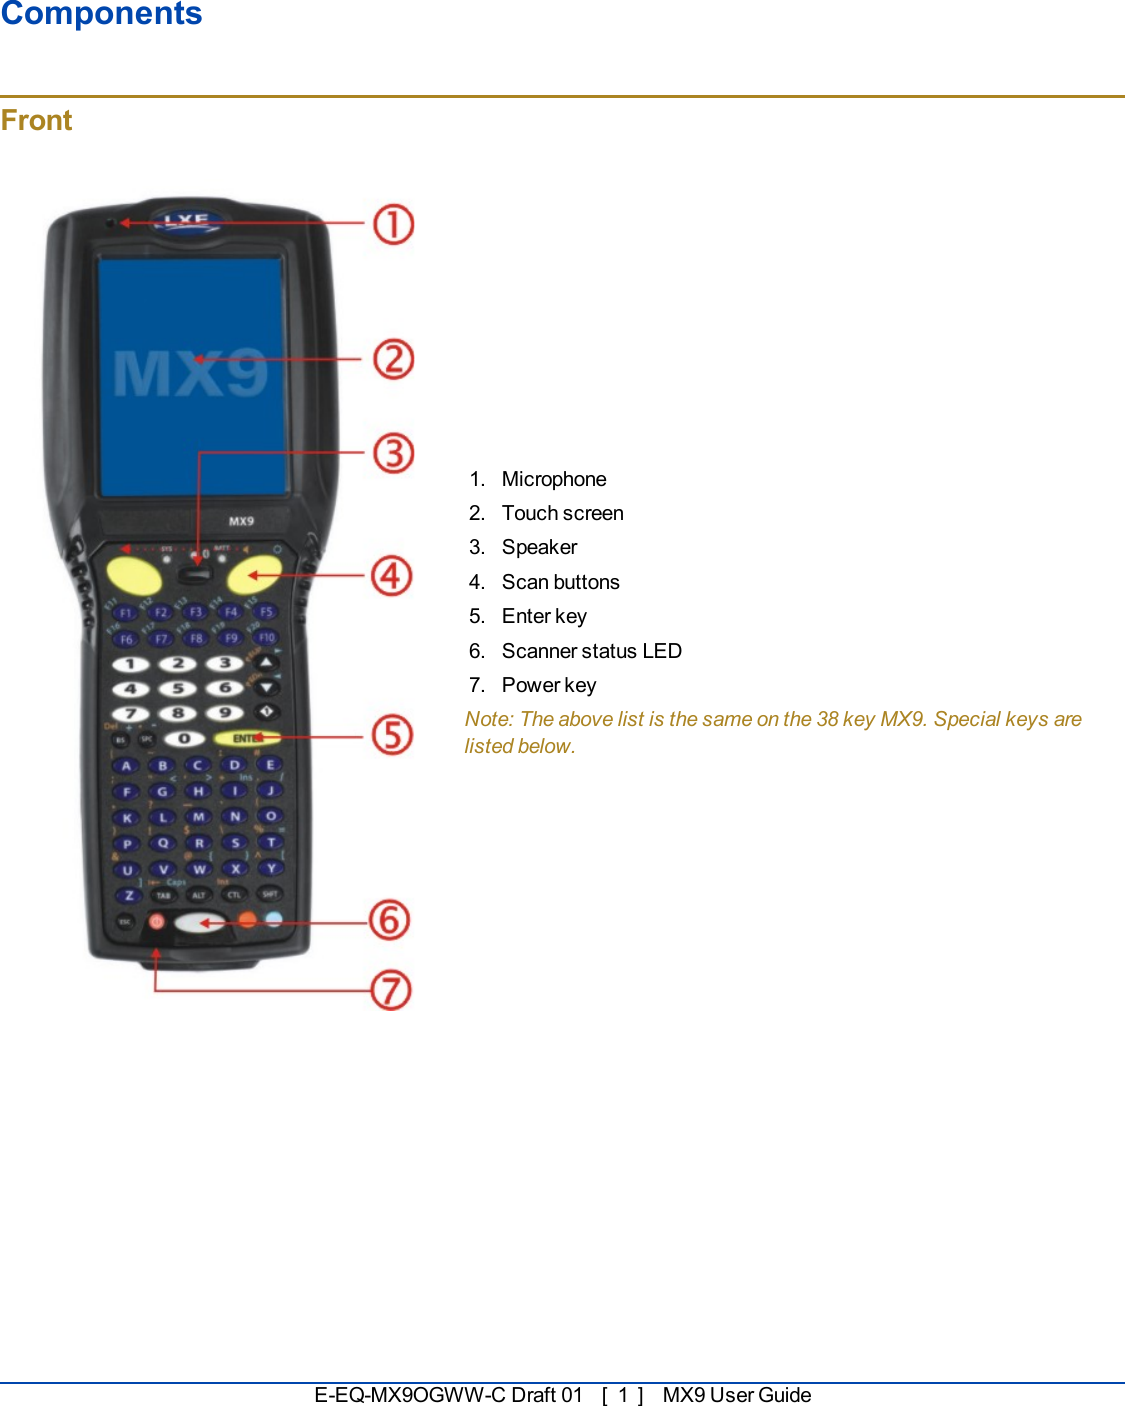 ComponentsFront1. Microphone2. Touch screen3. Speaker4. Scan buttons5. Enter key6. Scanner status LED7. Power keyNote: The above list is the same on the 38 key MX9. Special keys arelisted below.E-EQ-MX9OGWW-C Draft 01 [ 1 ] MX9 User Guide